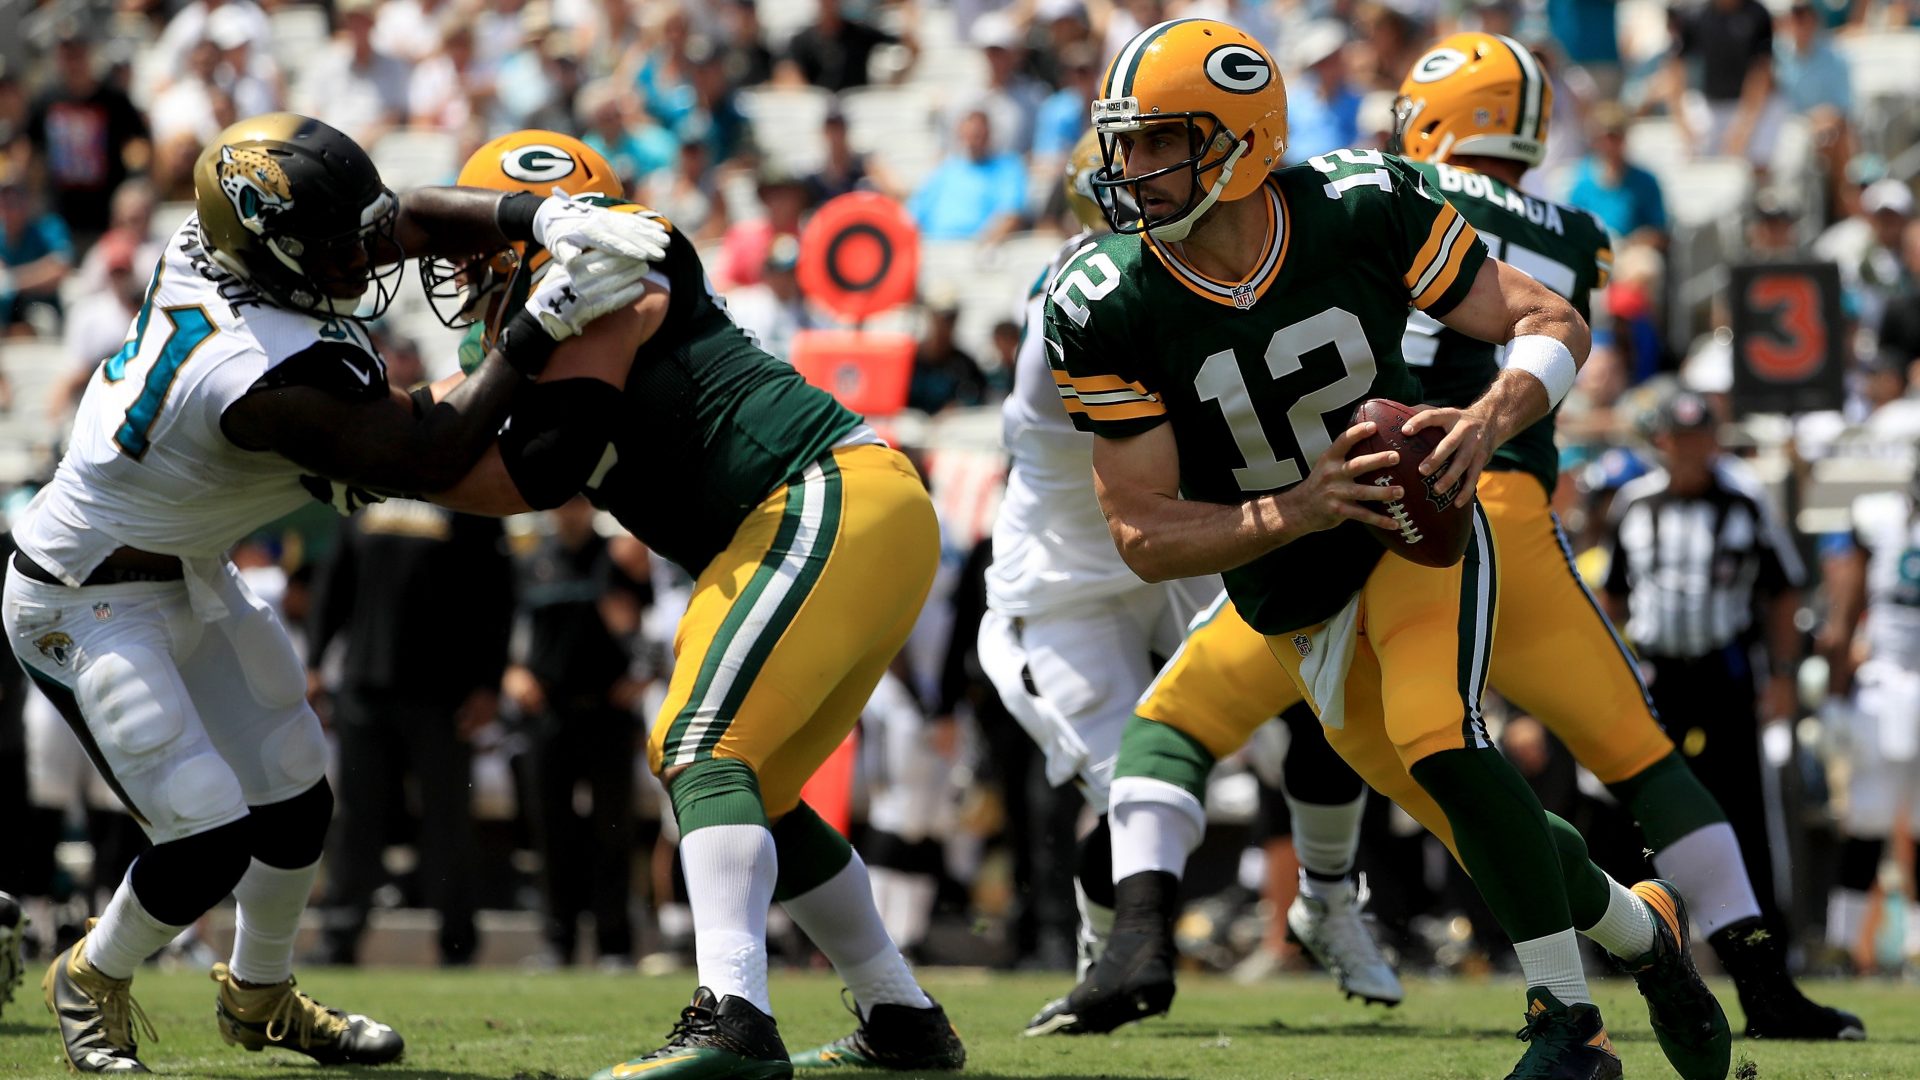 Jaguars vs Packers dwell circulate: be taught the technique to see NFL week 10 games online from anyplace